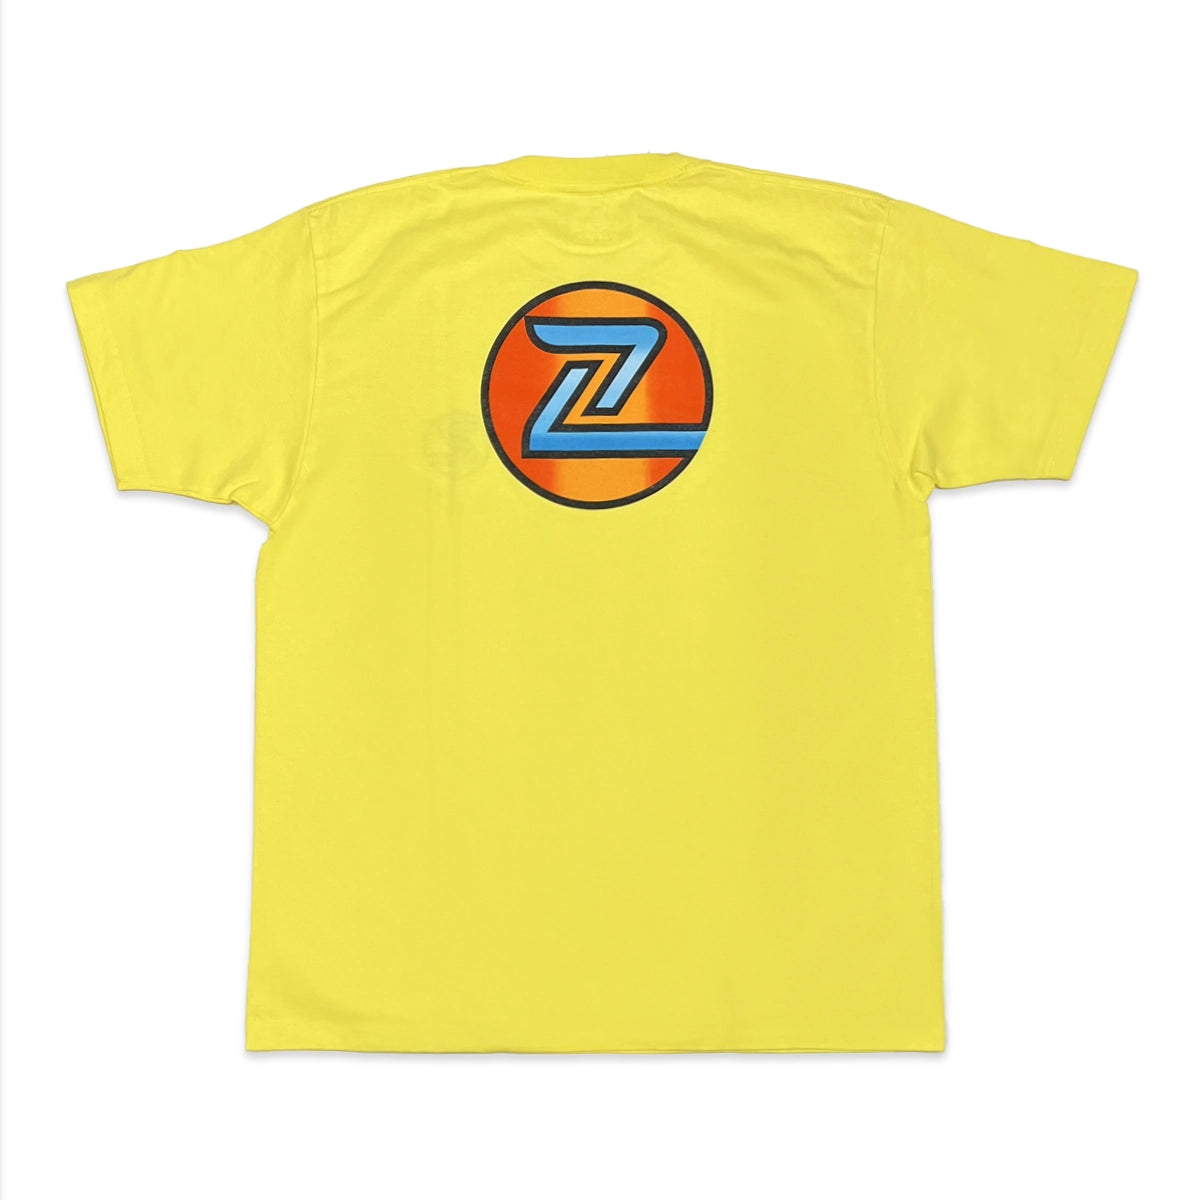 ■Z-TRAINBOW2 T-SHIRTS YELLOW-Z-FLEX SKATEBOARDS JAPAN OFFICIAL【公式通販】